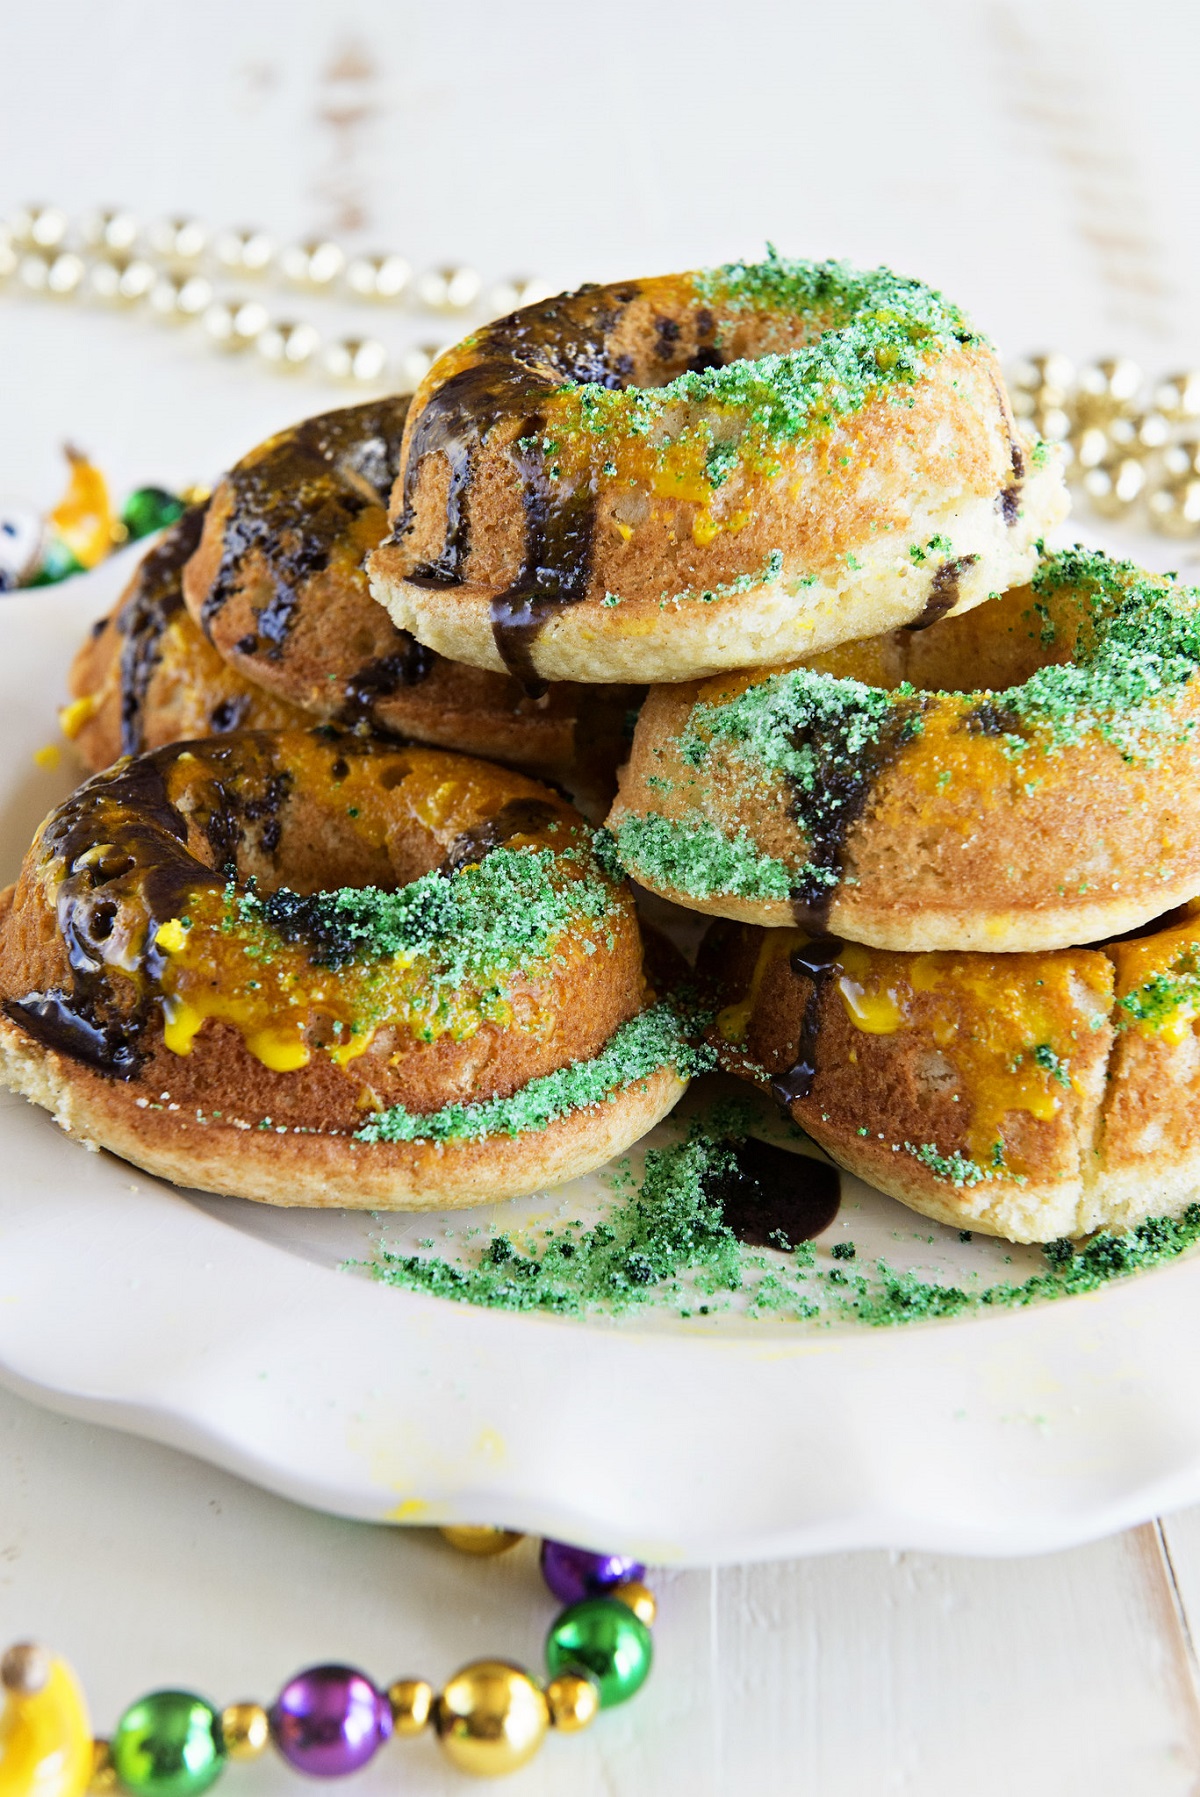 Platter of mardi gras donuts with beads and bright colors and sprinkles